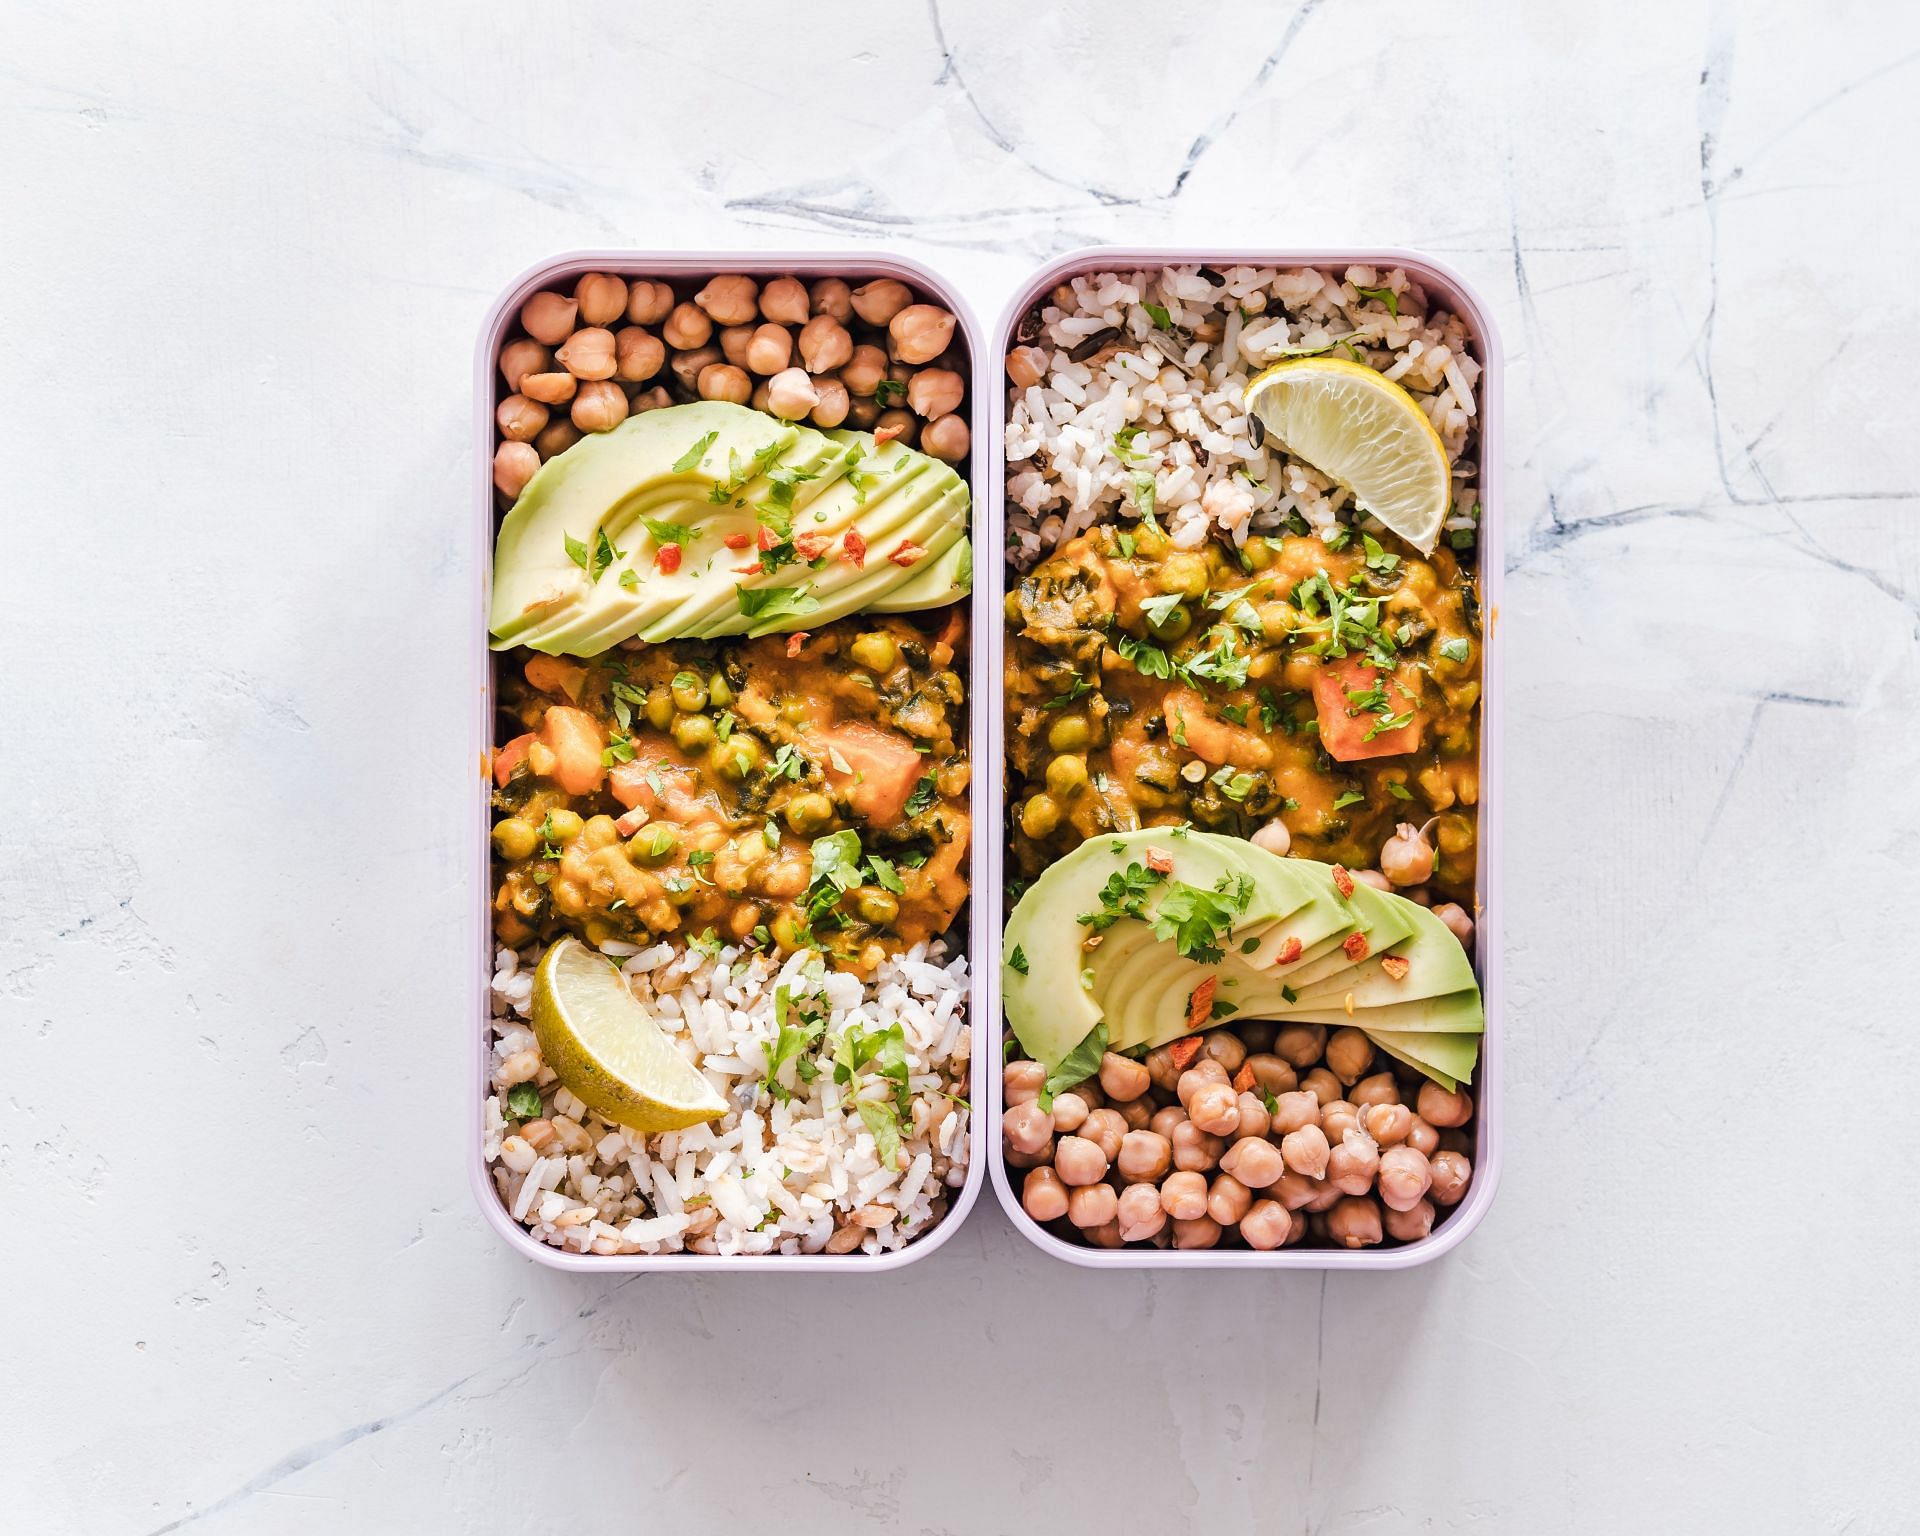 Variety of beans are good for muscle-building diet (Image via pexels/ella olsson)